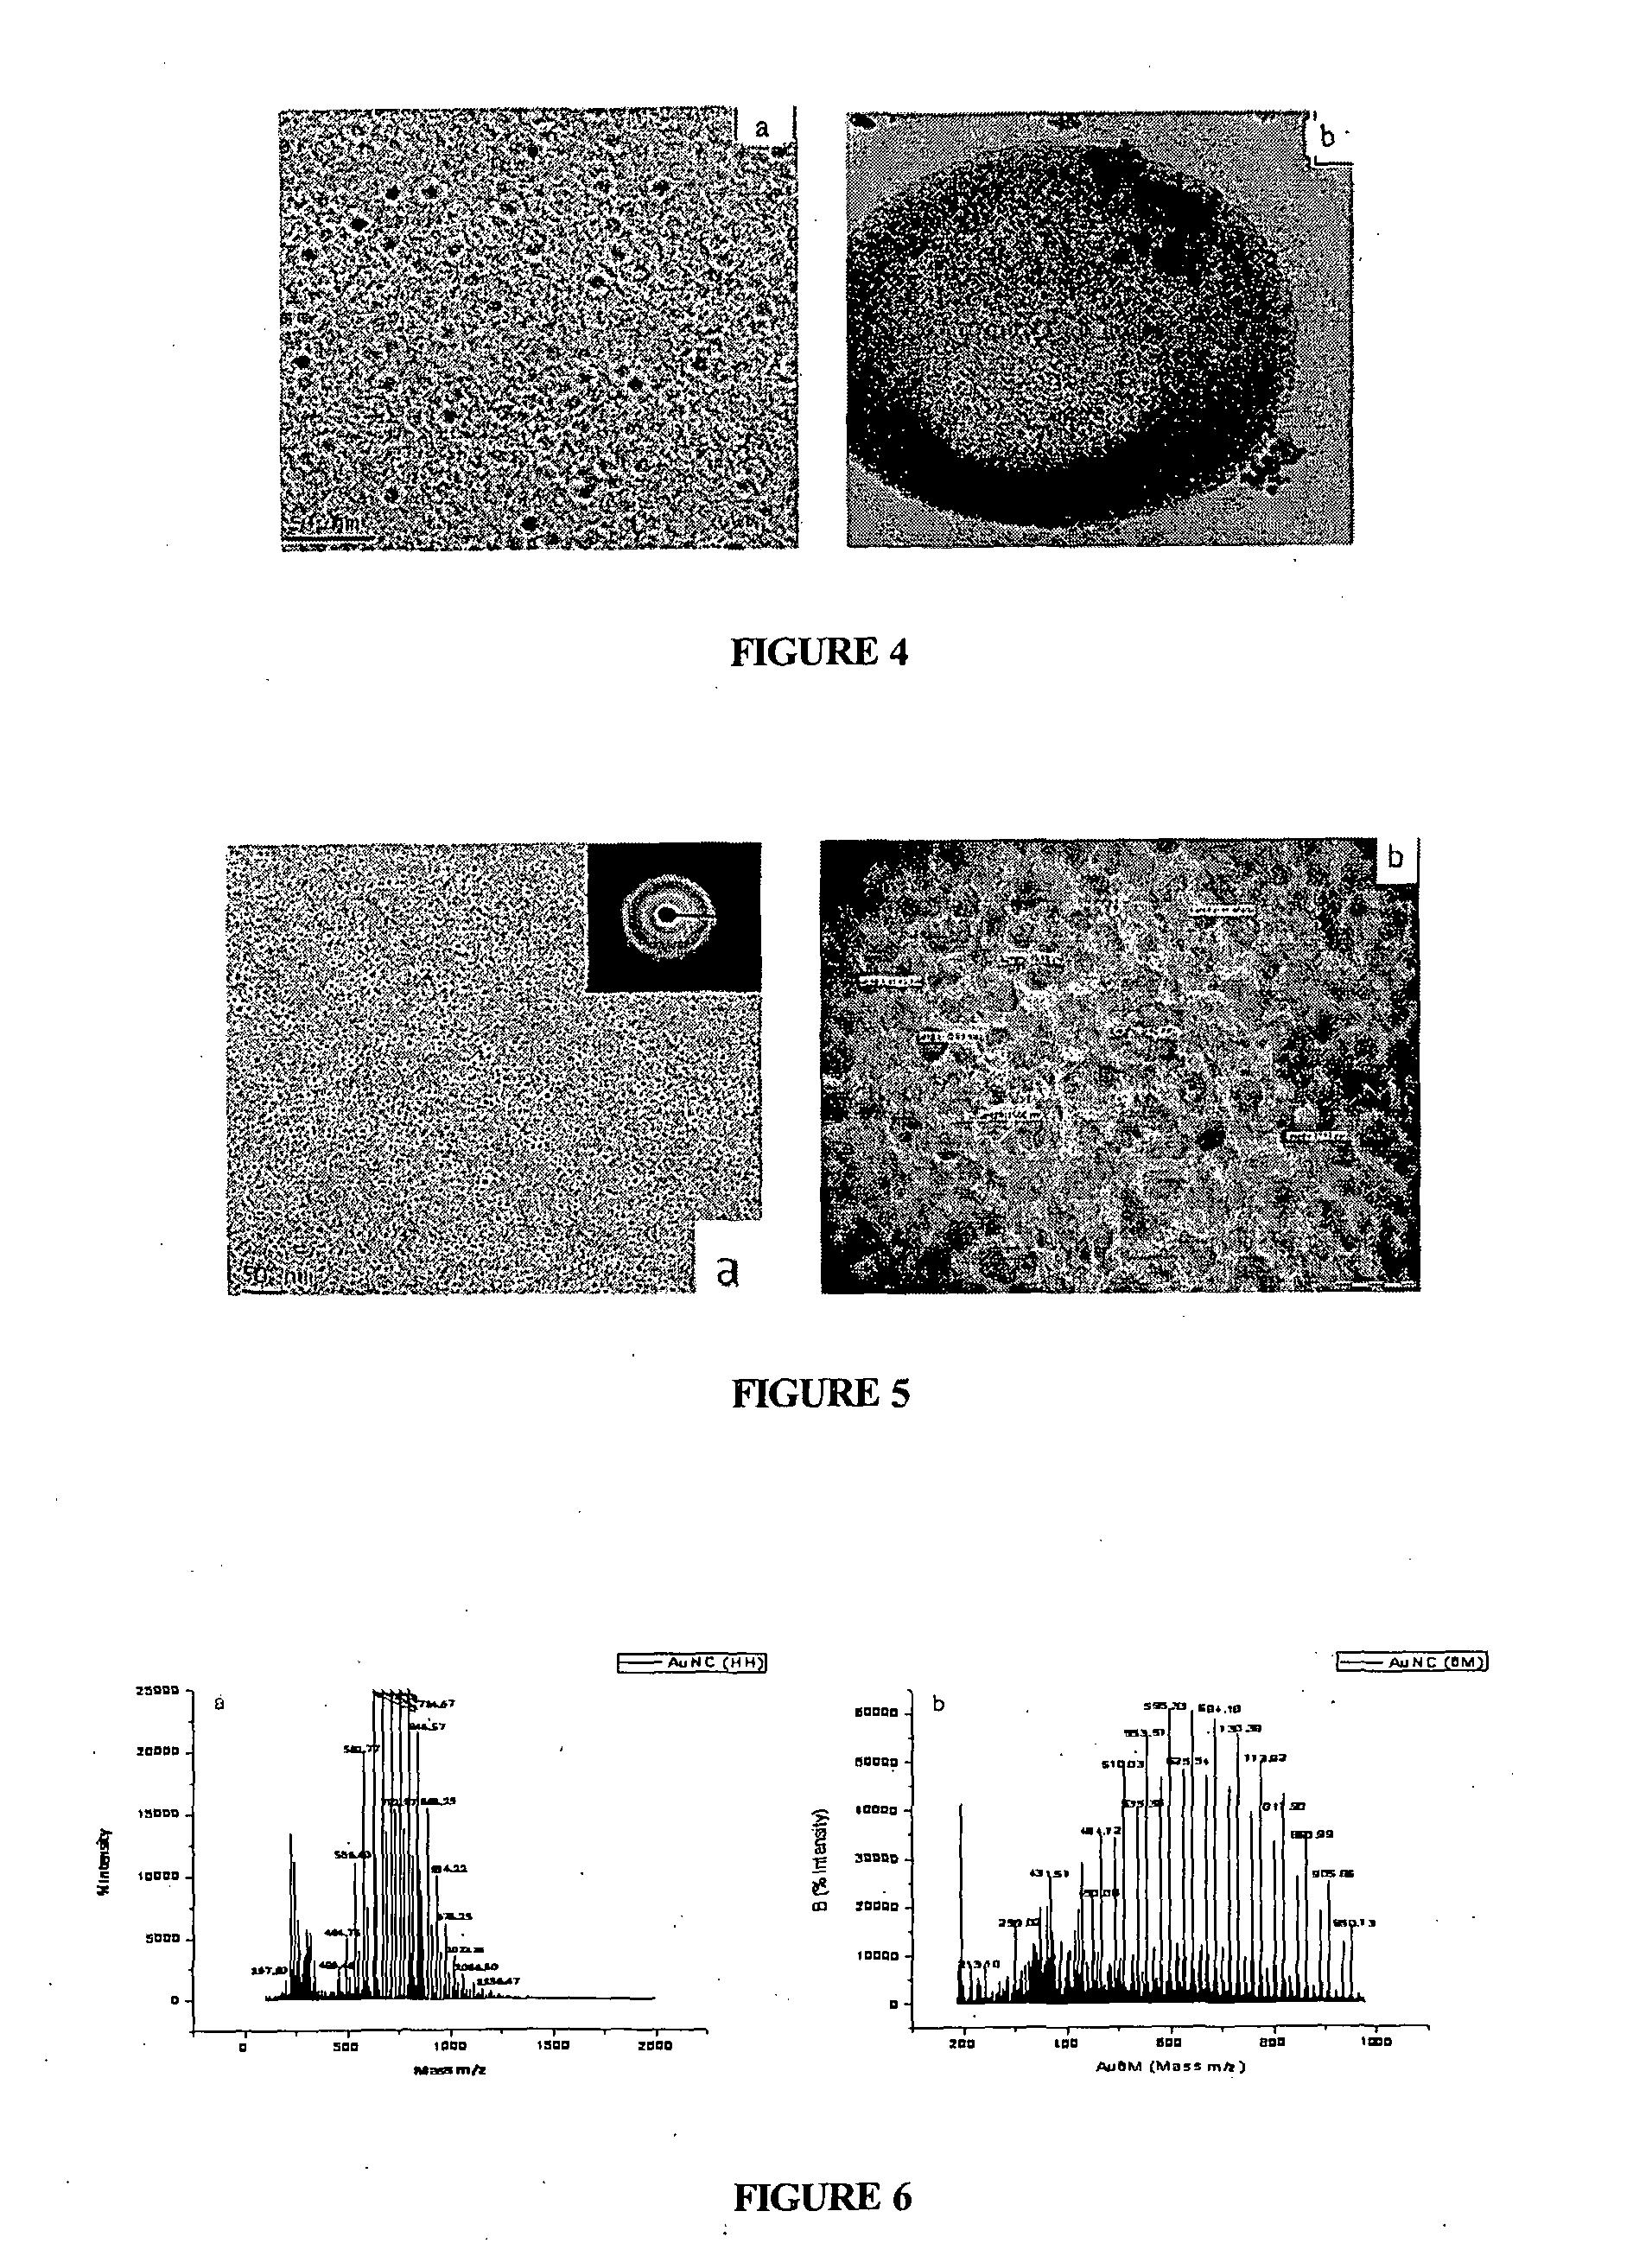 NANO aggregates of molecular ultra small clusters of noble metals and a process for the preparation thereof